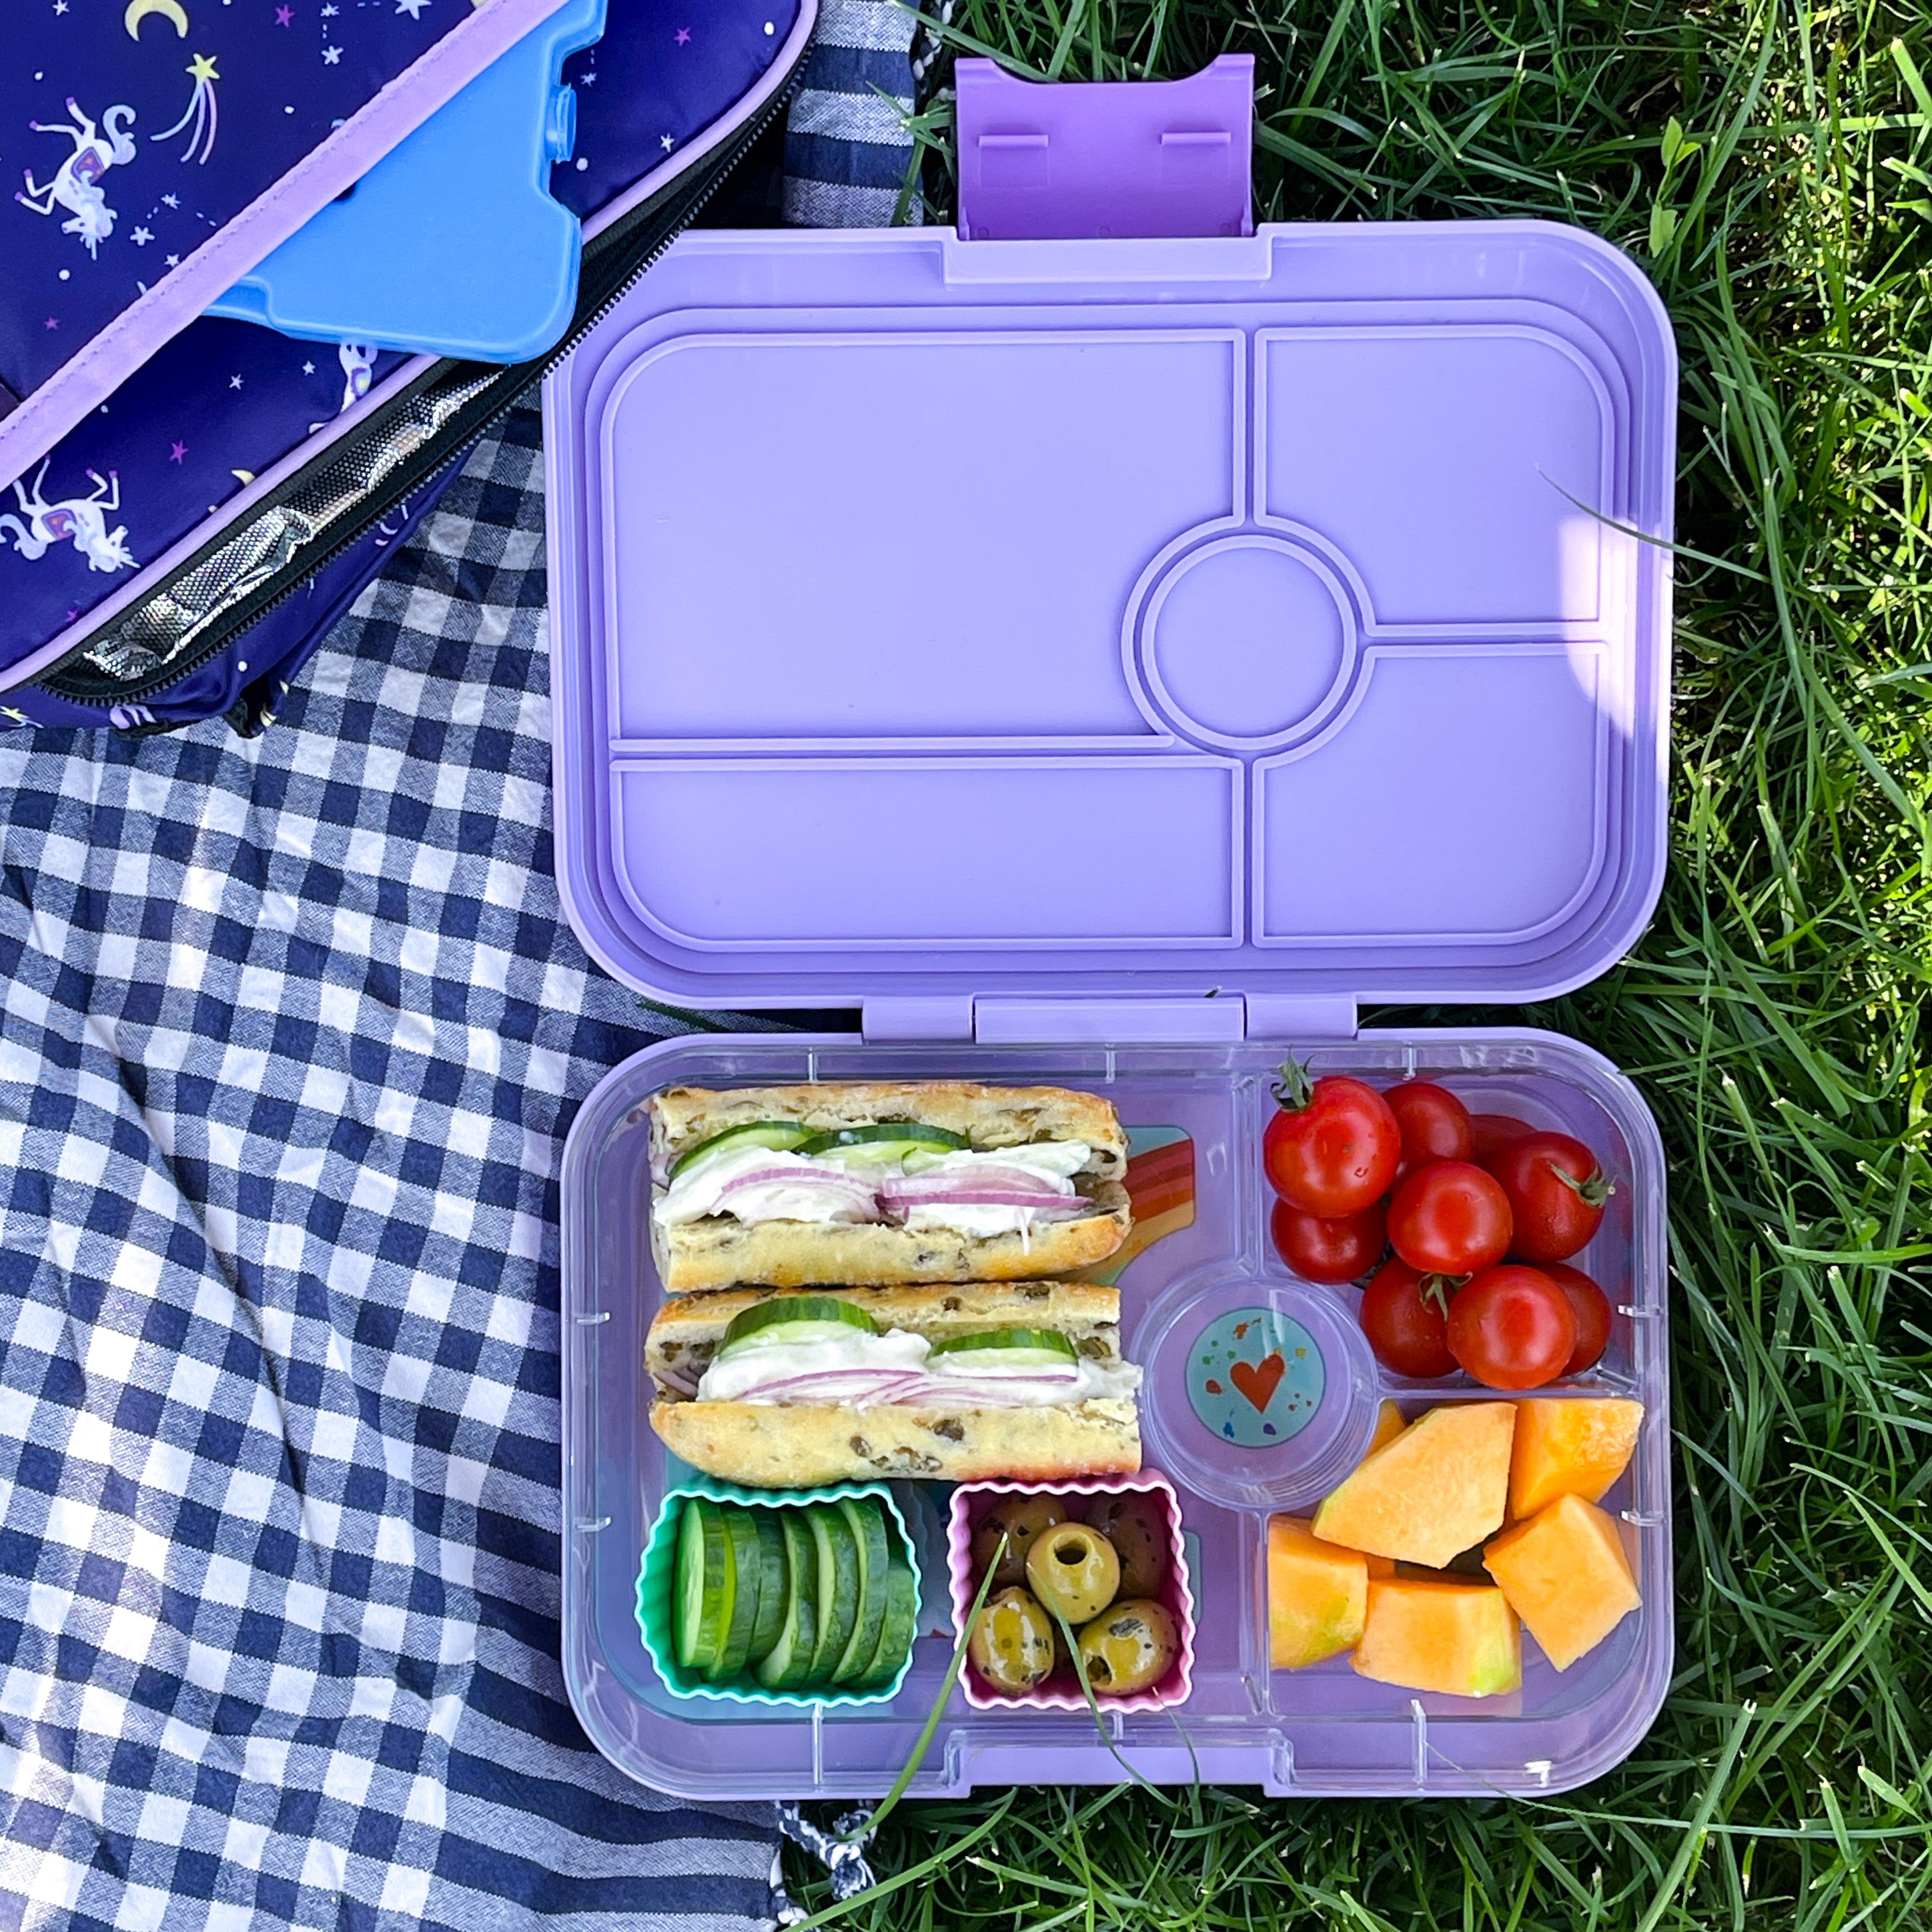 Yumbox Tapas Leakproof Bento Box: 4-Compartment Bento Lunch Box, Leakproof  & Perfectly Portioned for…See more Yumbox Tapas Leakproof Bento Box